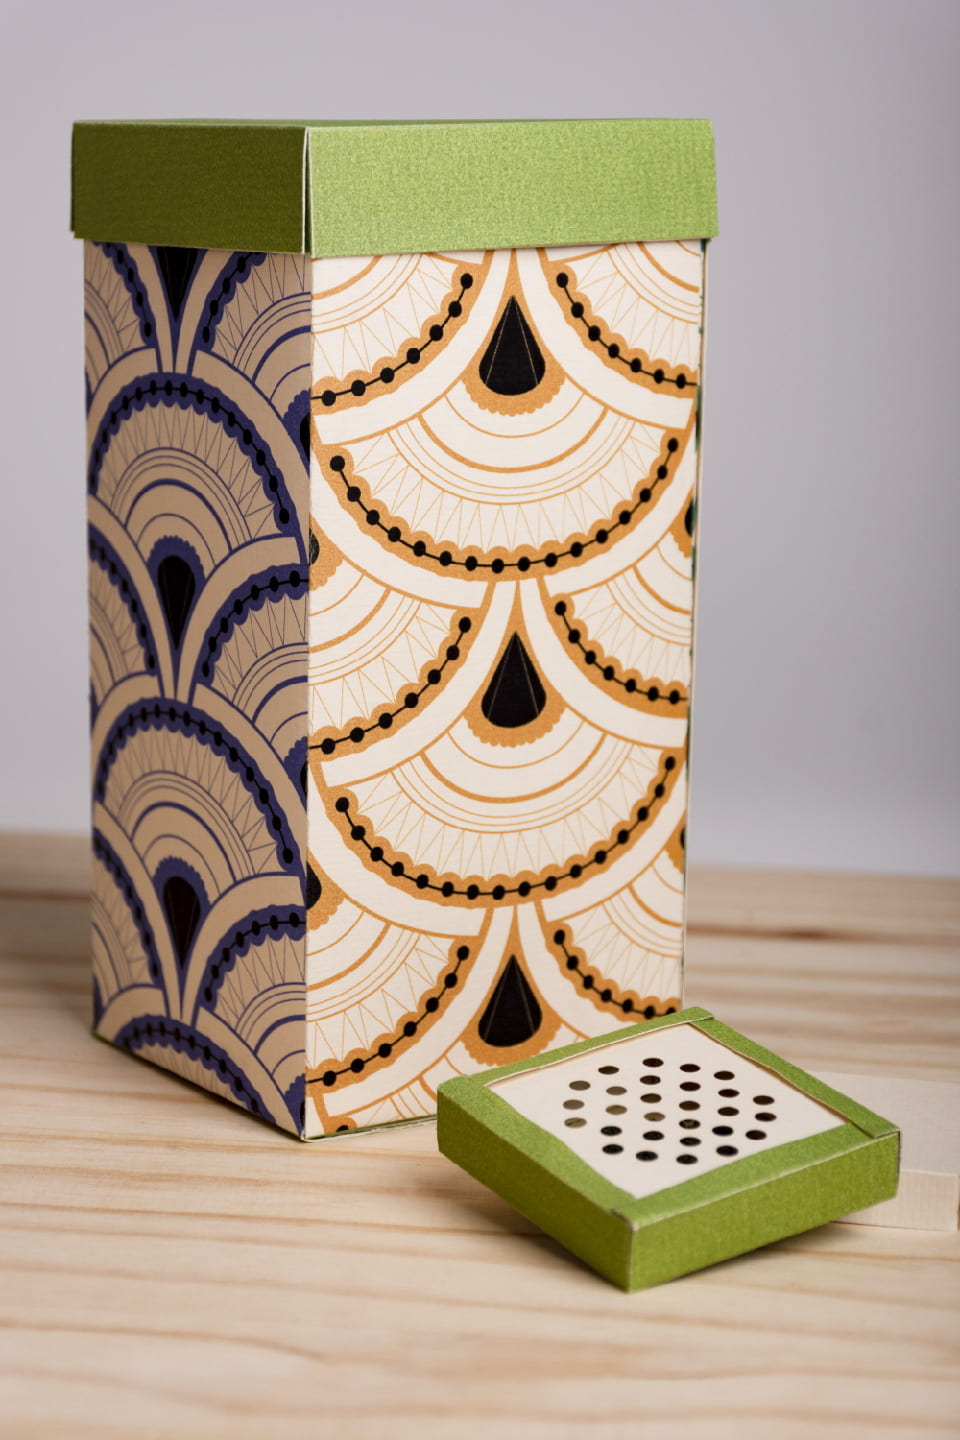 Packaging design for matcha. One large green patterend box that pulls up to show smaller, individual packages of matcha. The lid of these smaller packages is perforated.